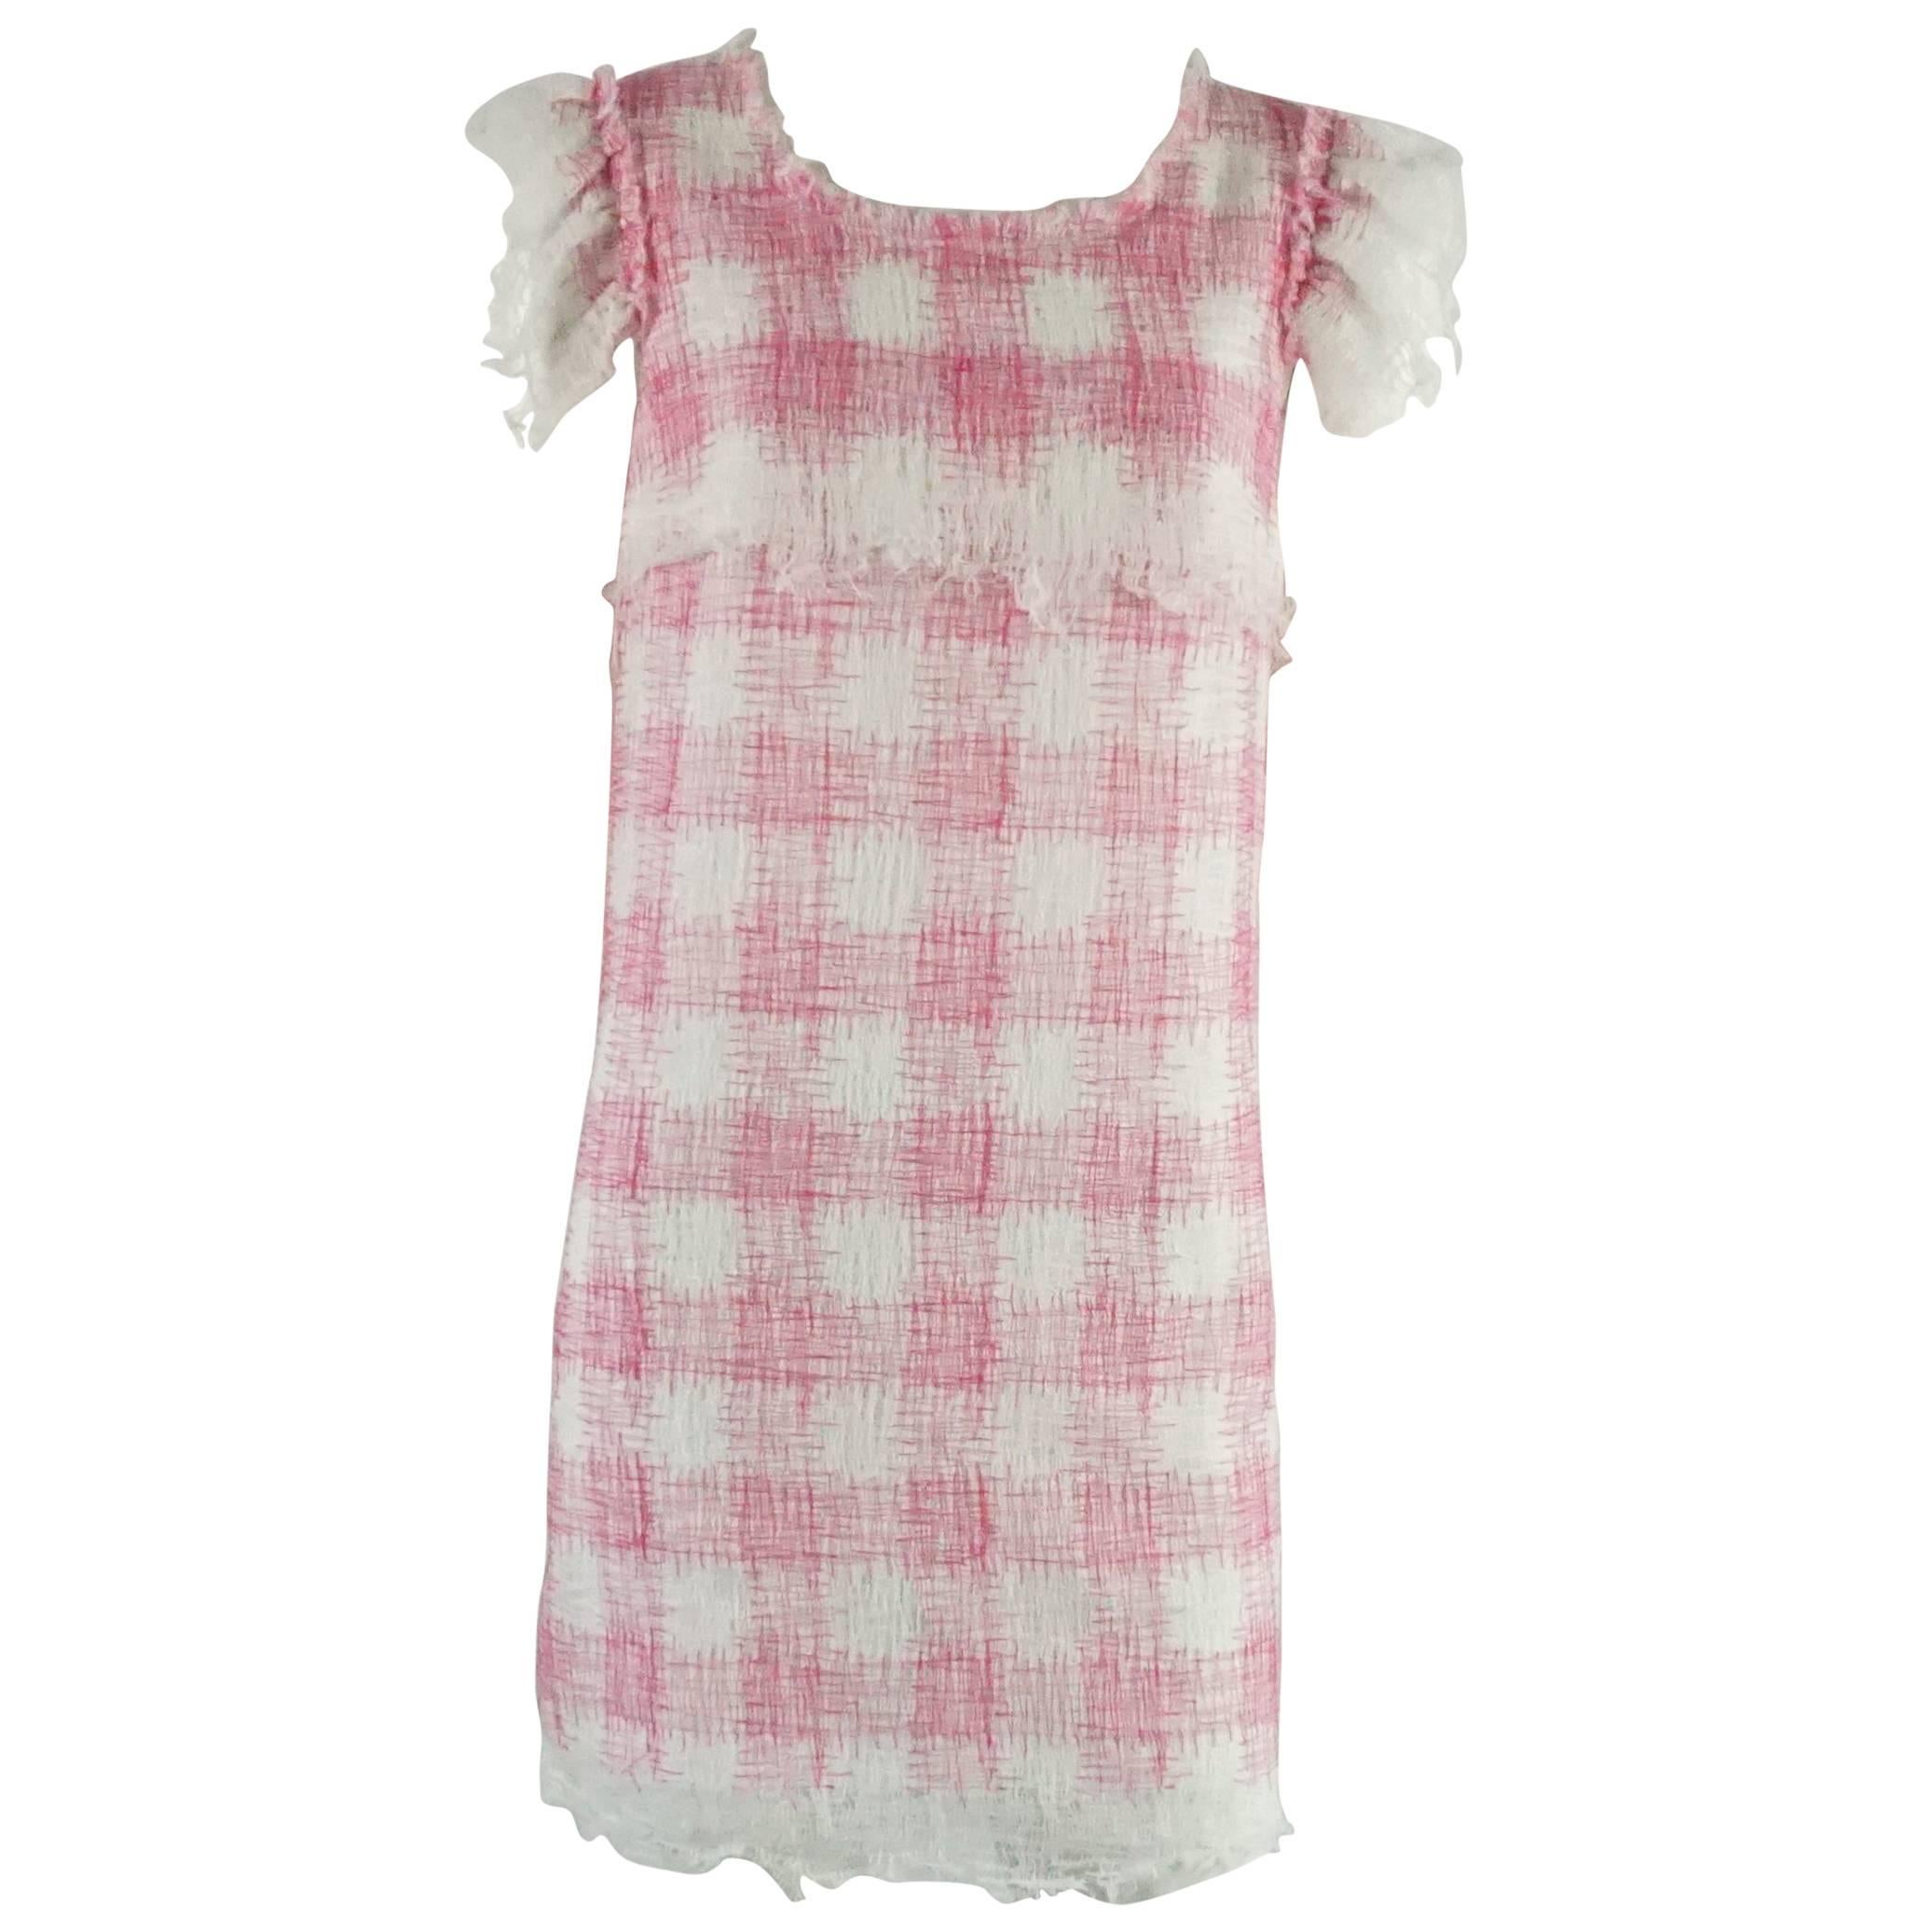 Chanel Pink and White Checkered Dress - 36 - 11C